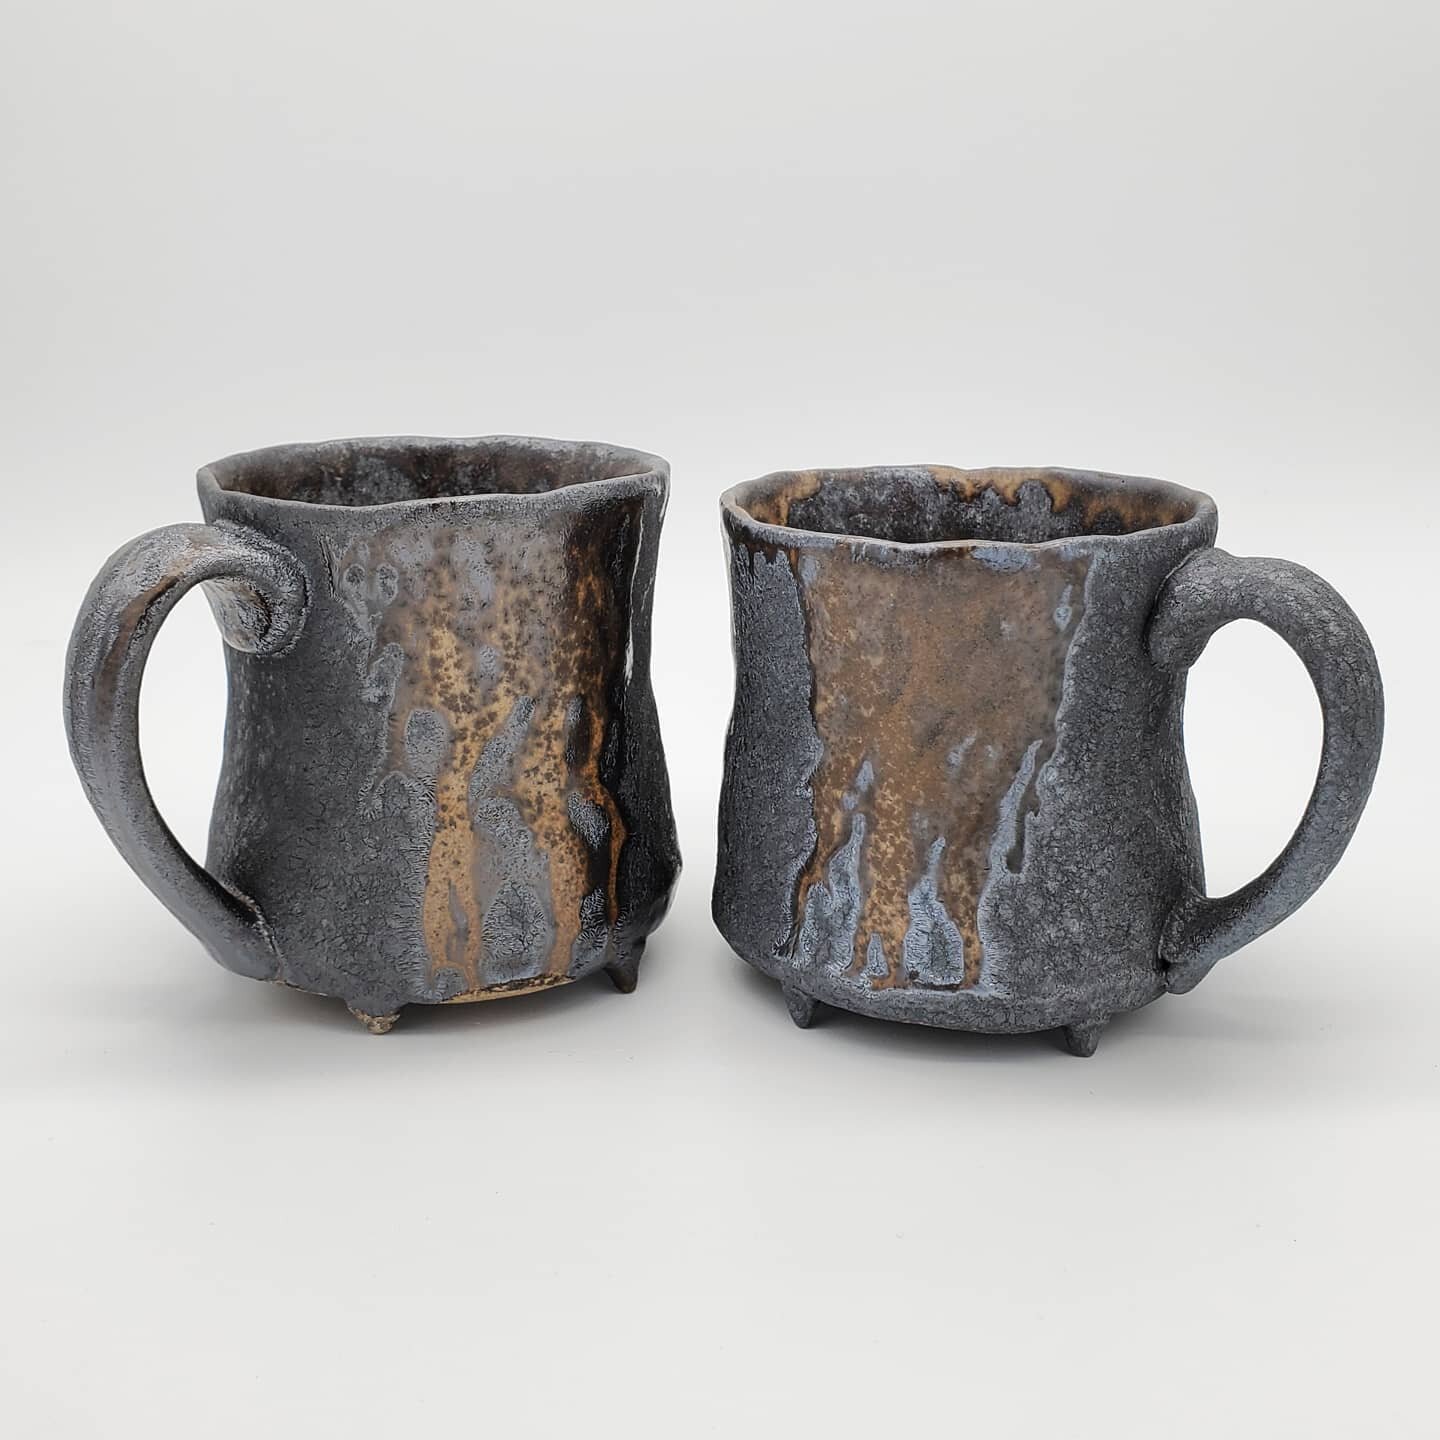 Pinched mugs from the #geoffpickettpottery wood salt kiln

Same clay and glazes as the previous post, but the clay became so metallic and glittery in the salt

------------

#mugshotmonday #ceramics #clay #pottery #cup #mug #stoneware #saltfired #woo